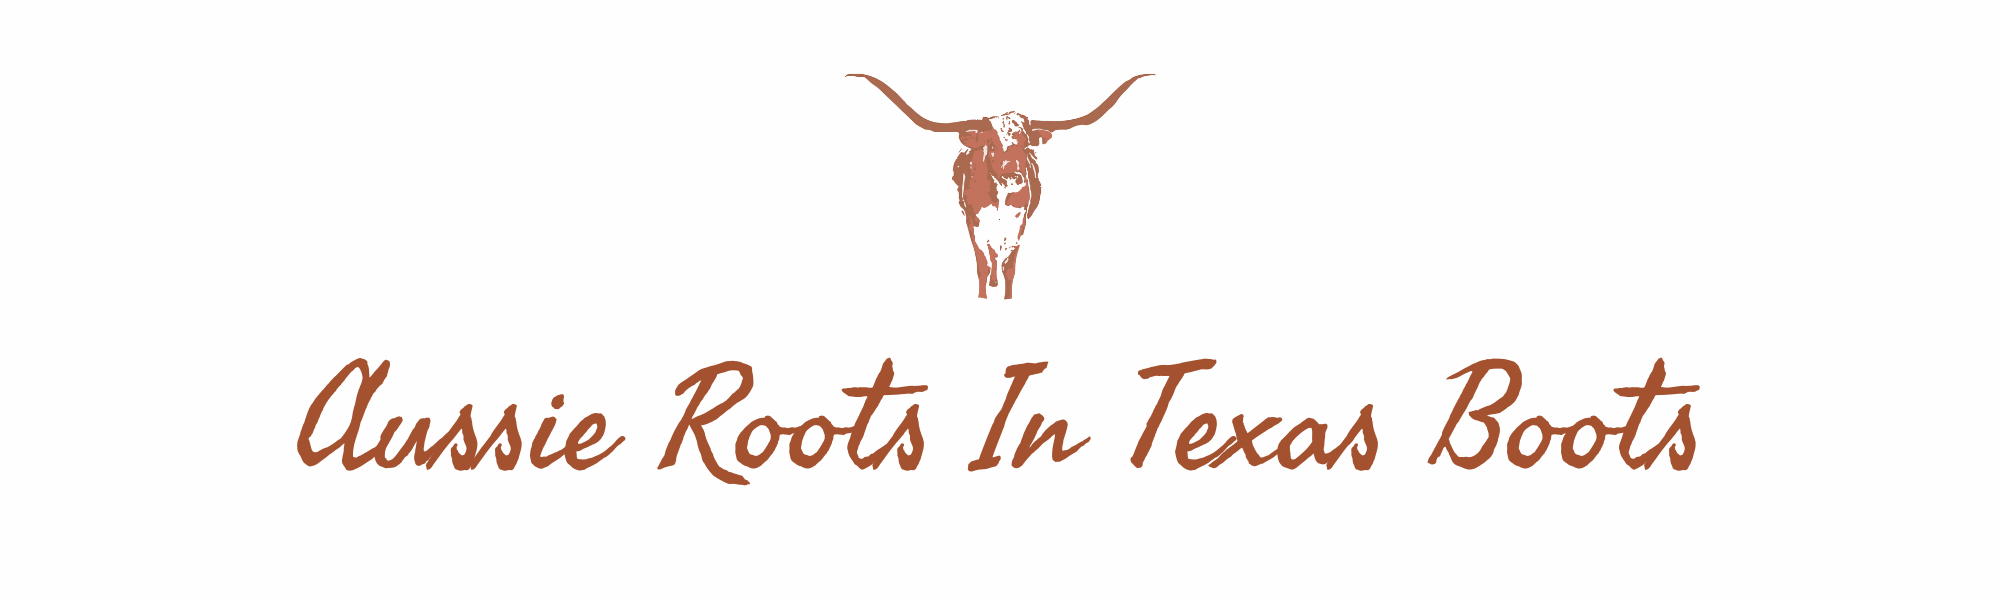 Aussie Roots In Texas Boots